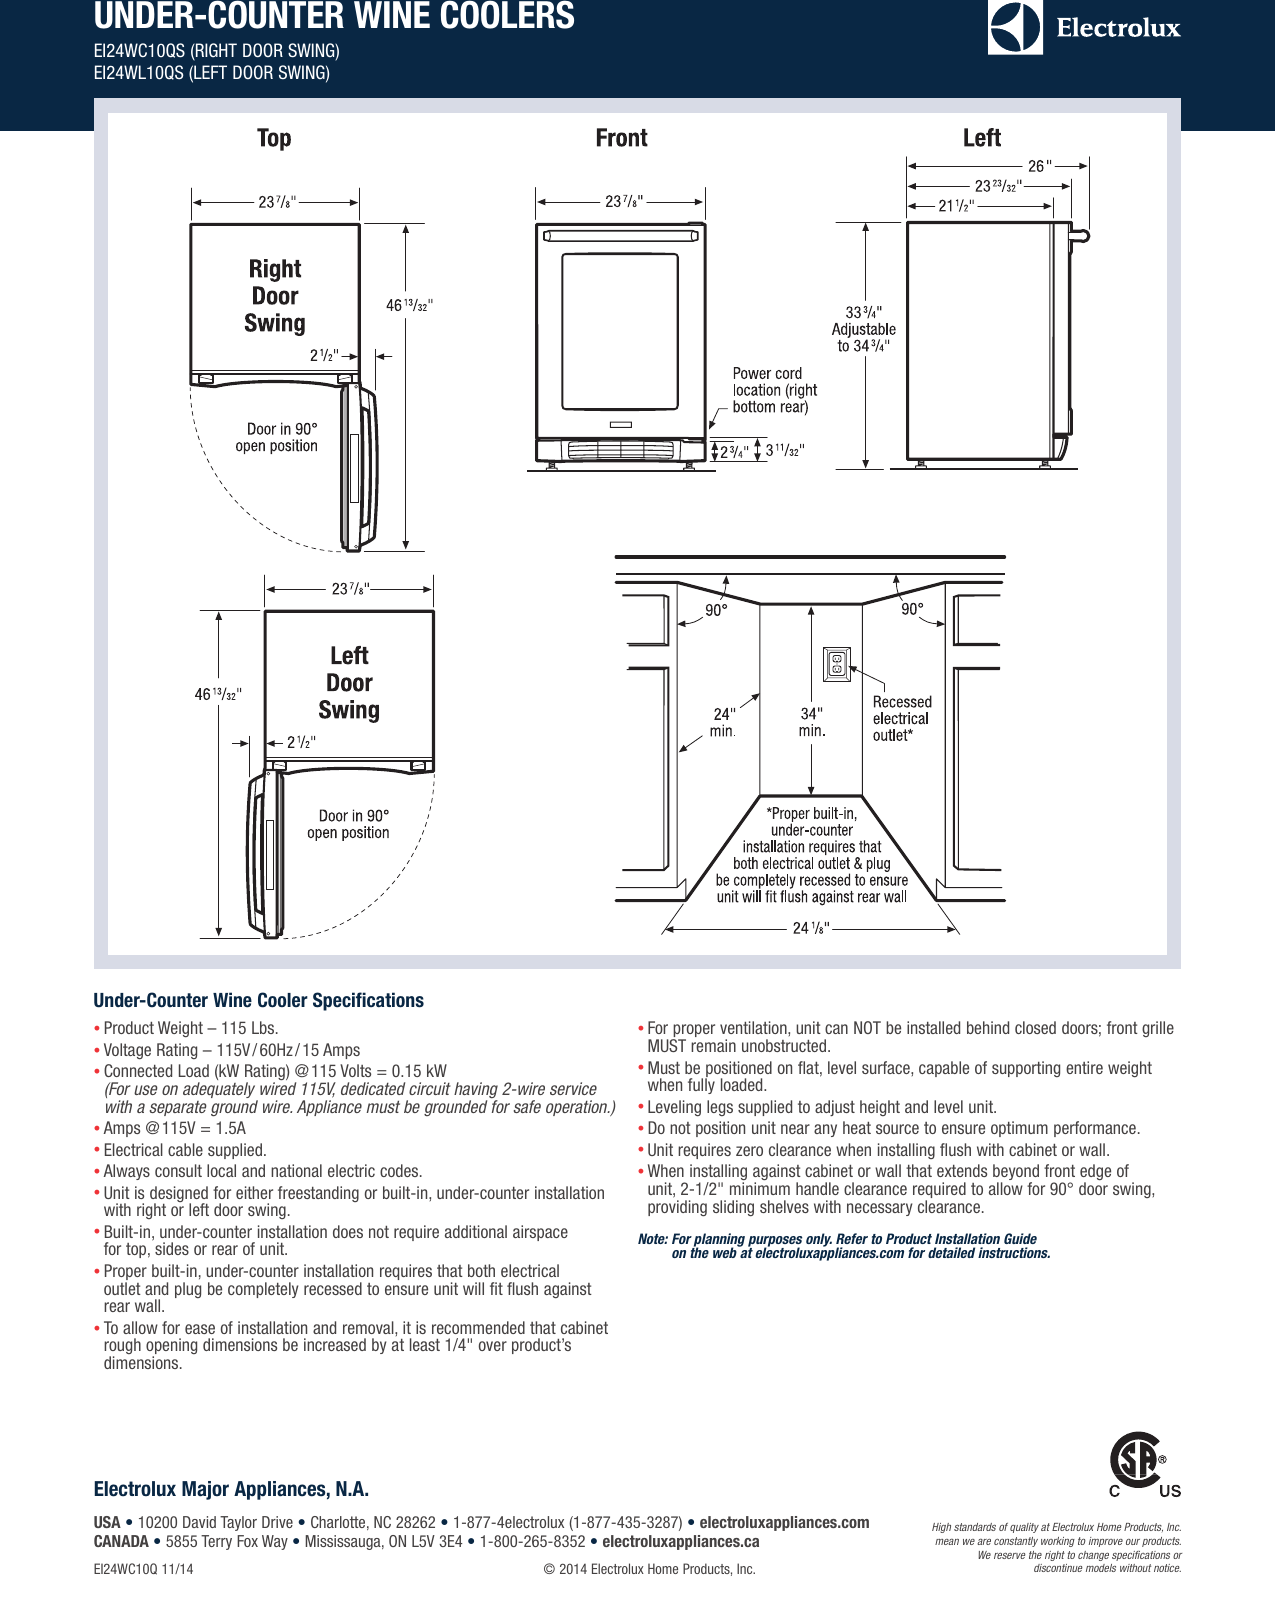 Page 3 of 6 - Electrolux Electrolux-24-Under-Counter-Wine-Cooler-With-Right-Door-Swing-Ei24Wc10Qs-Product-Specifications-Sheet-  Electrolux-24-under-counter-wine-cooler-with-right-door-swing-ei24wc10qs-product-specifications-sheet